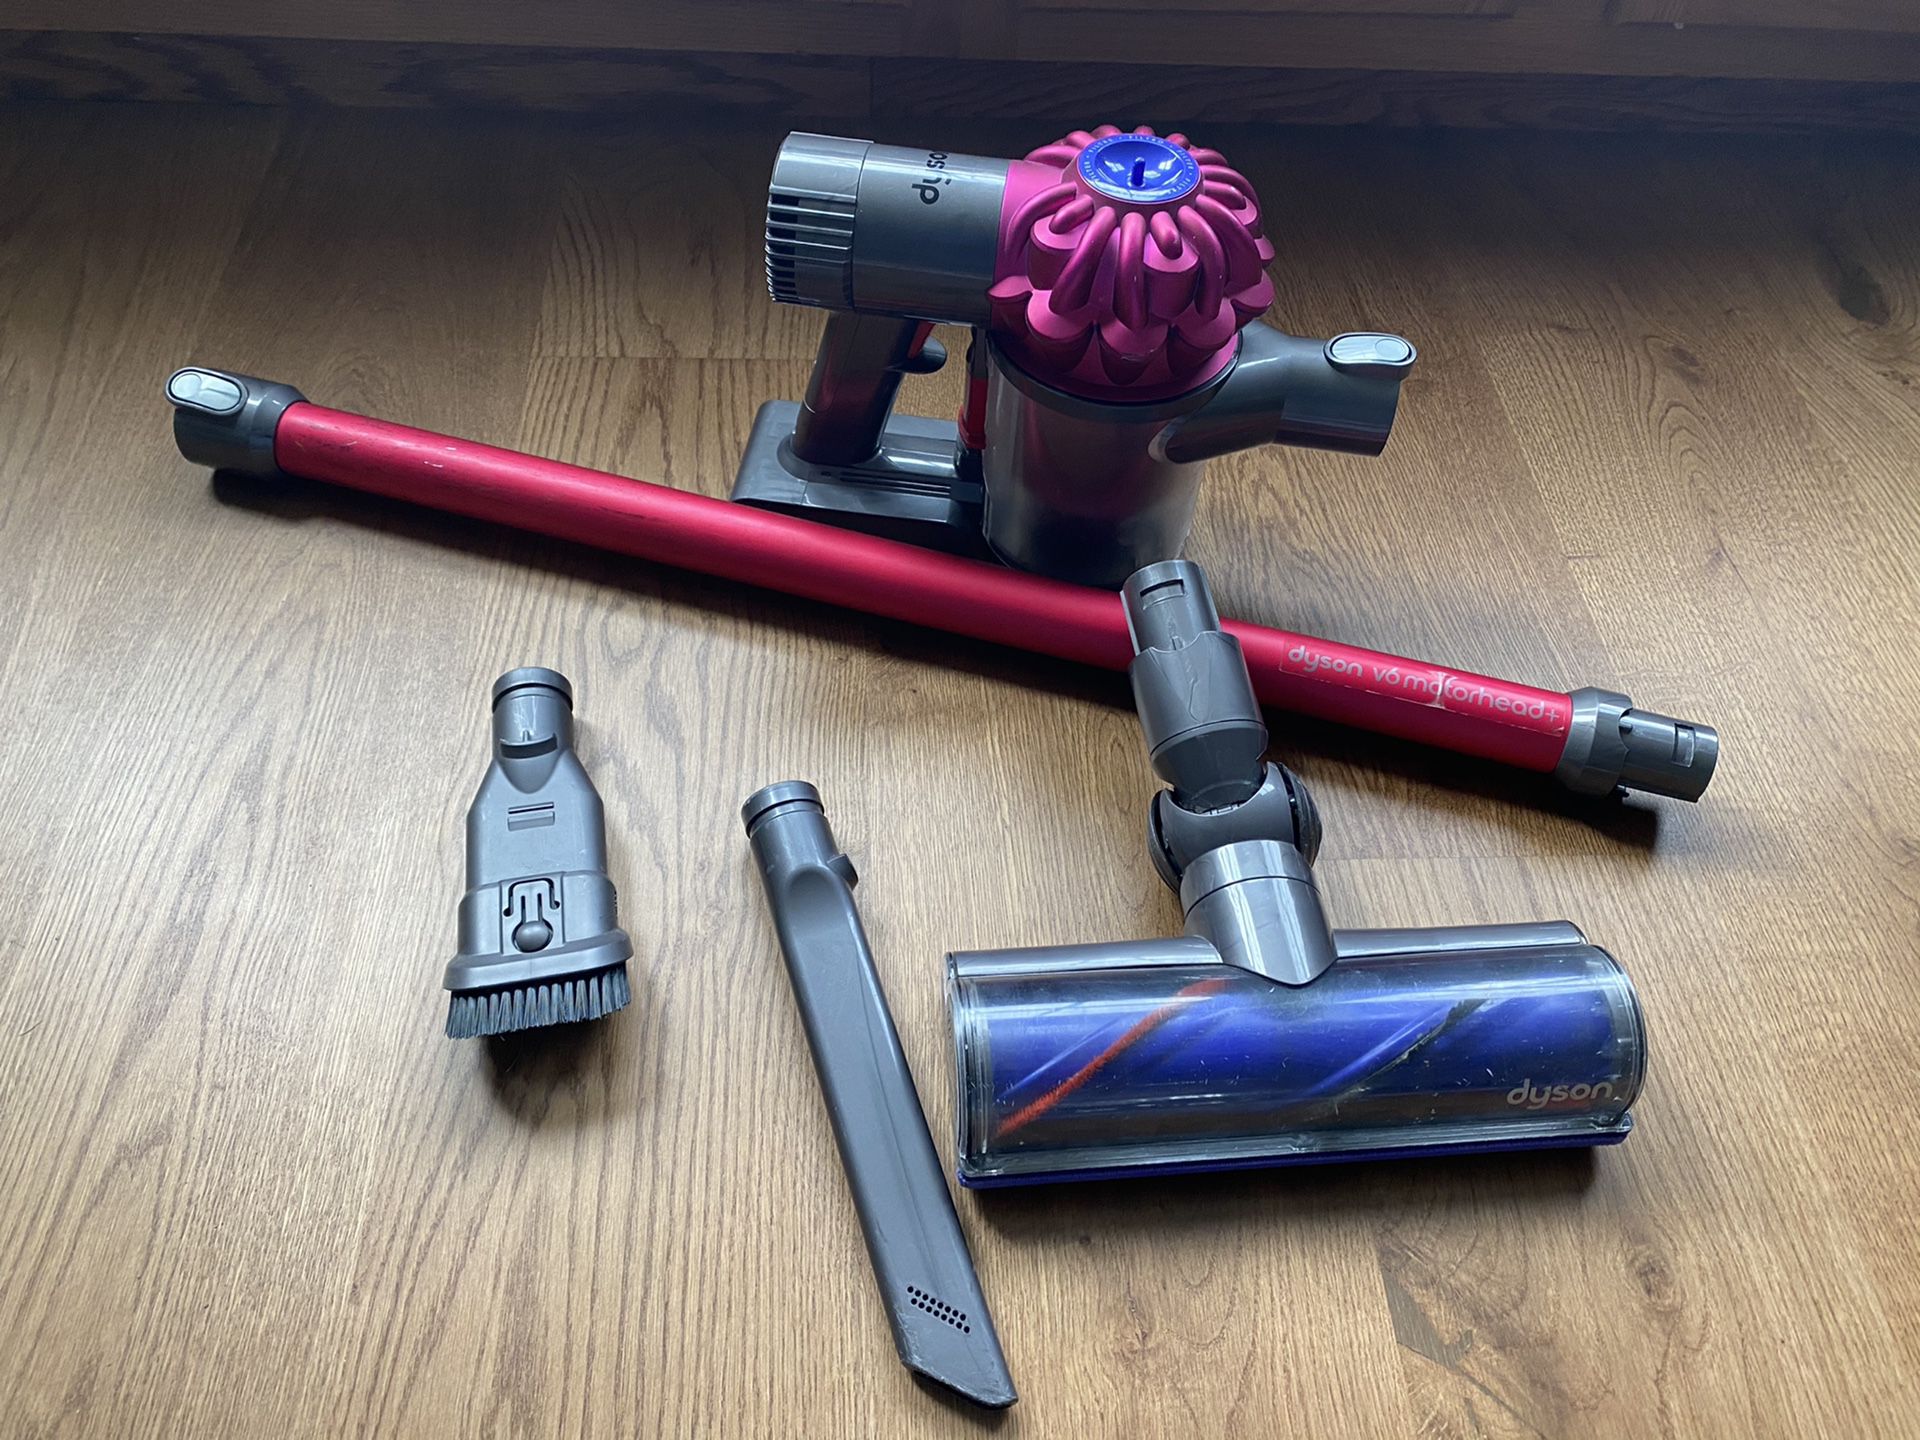 Dyson V6 Motorhead+ Plus Battery powered vacuum with accessories